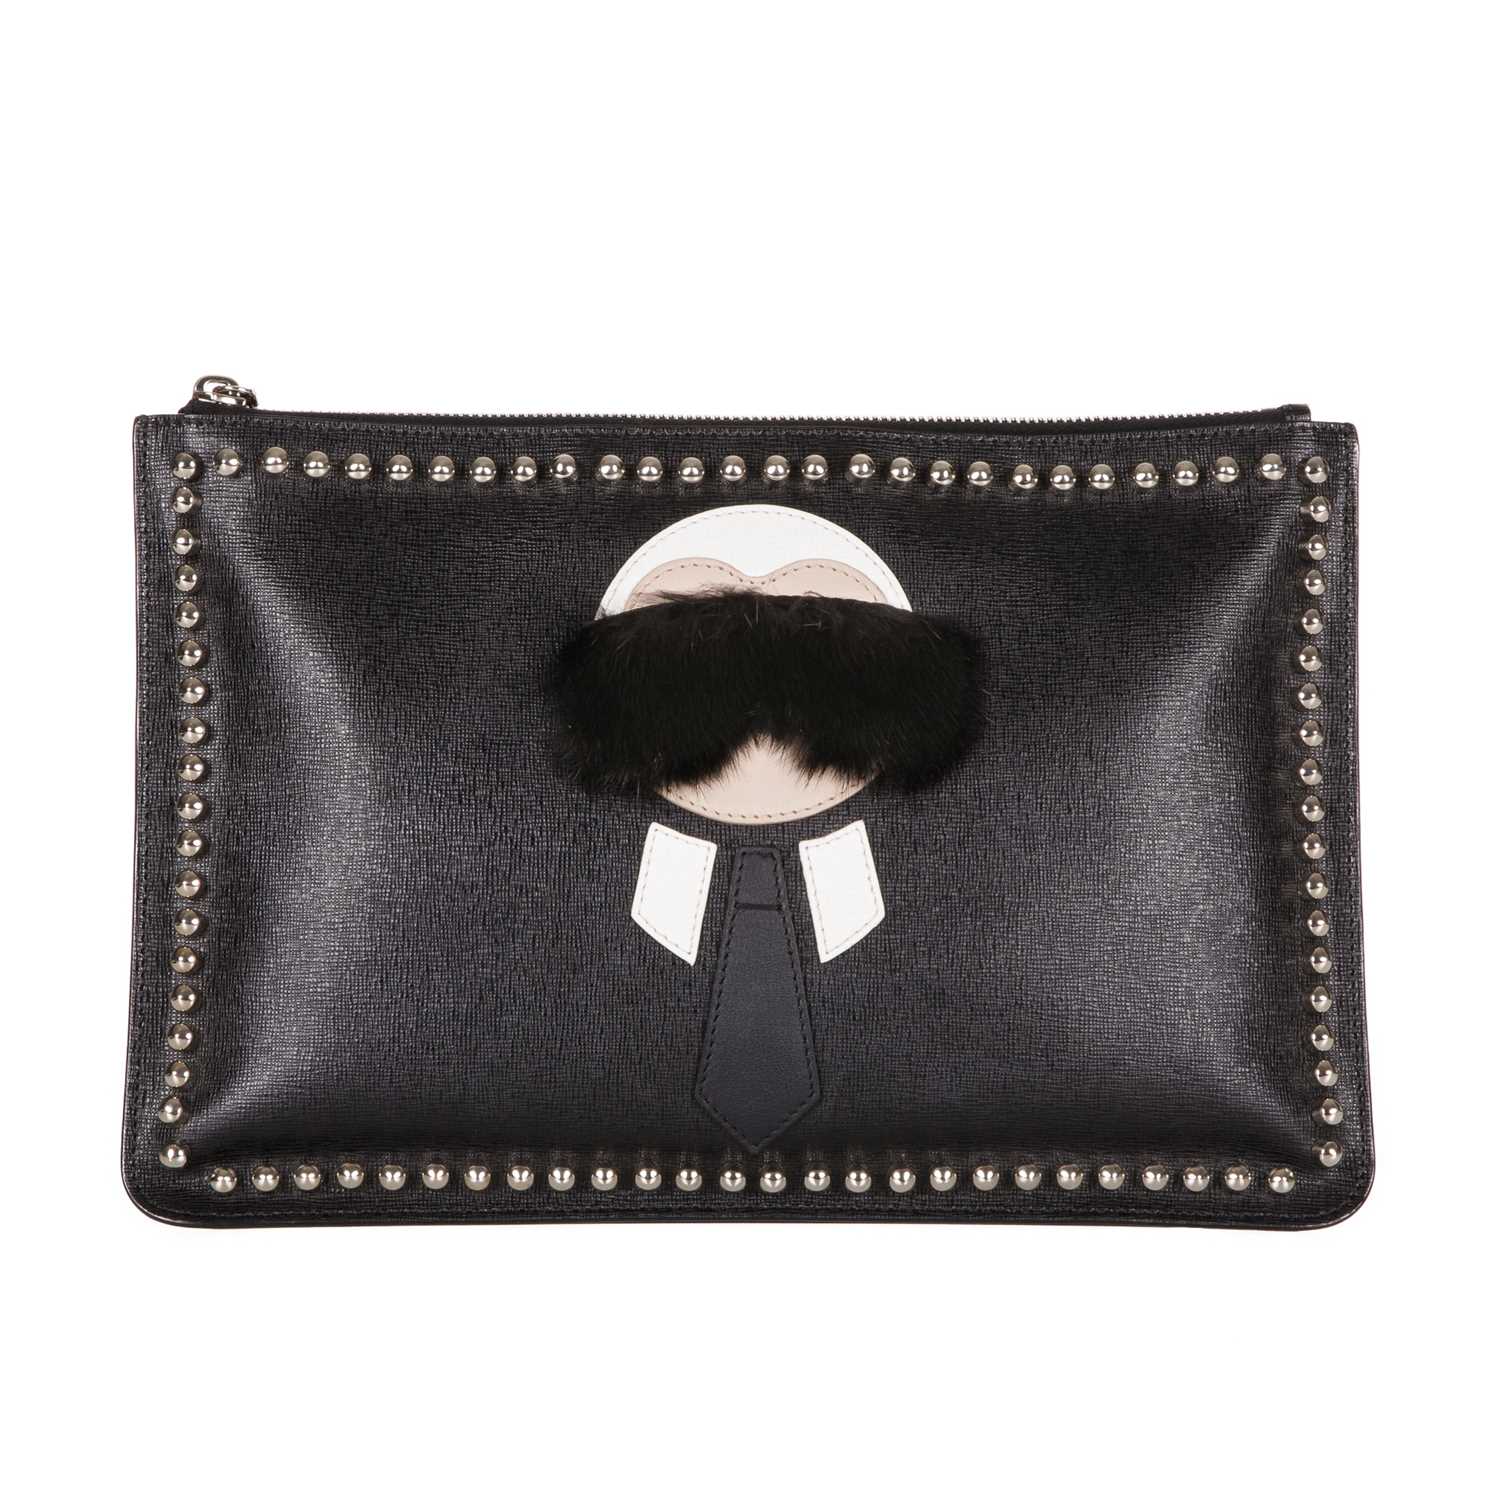 Fendi, a Karlito clutch, crafted from black saffiano leather with silver-tone studded trim,